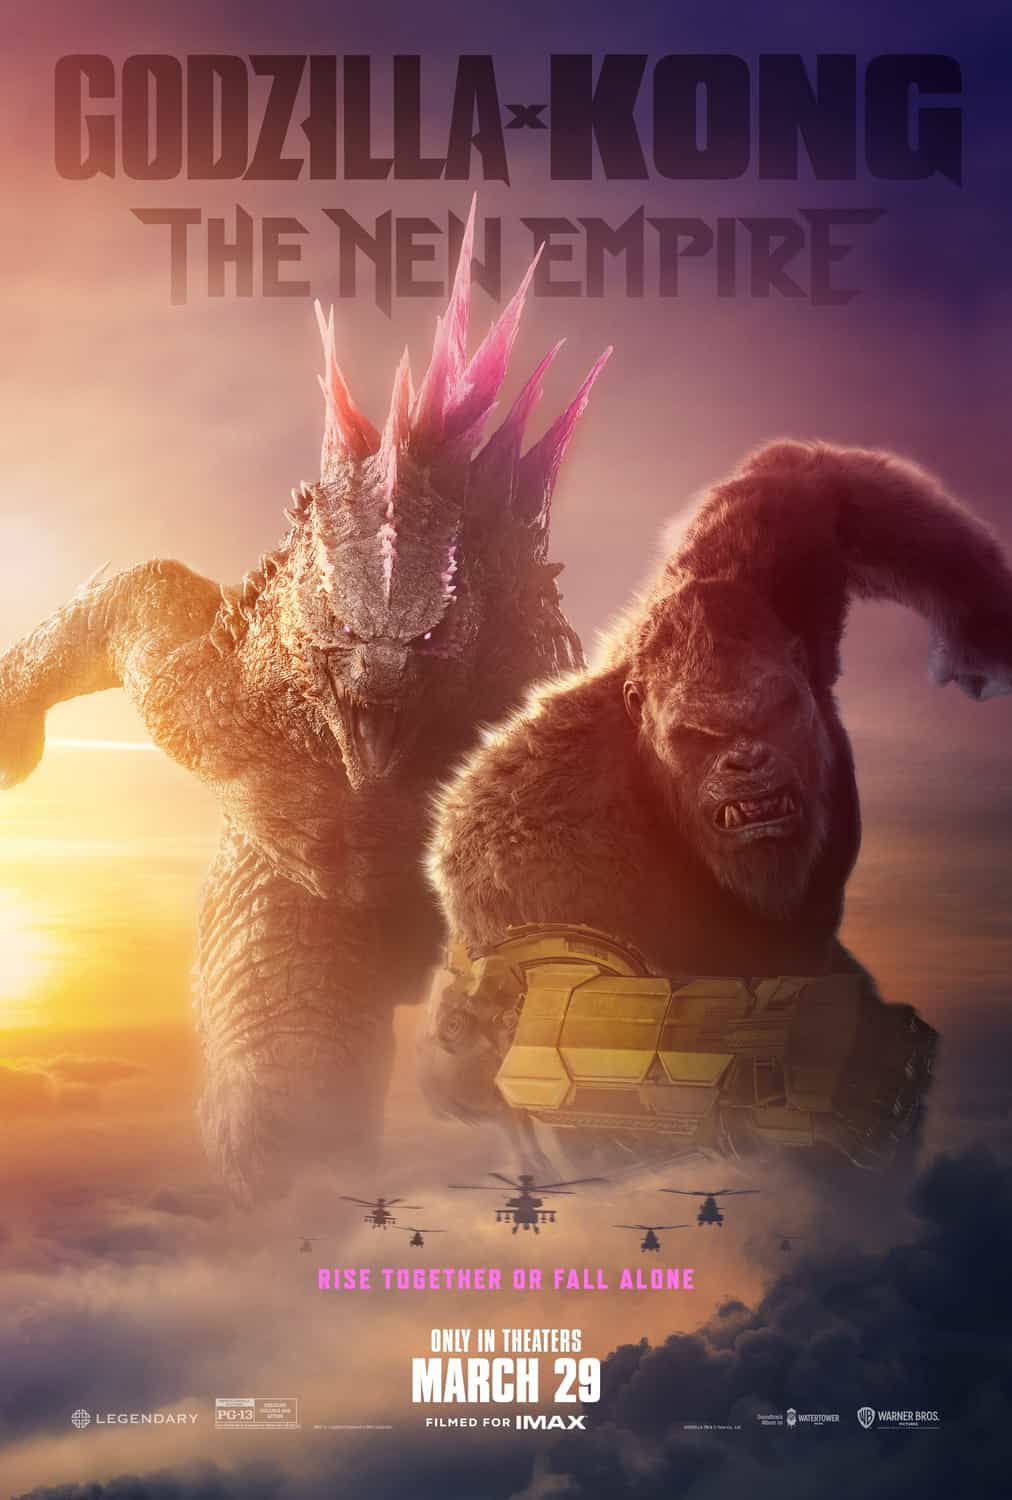 Global Box Office Weekend Report 19th - 21st April 2024:  Godzilla X Kong: The New Empire is the top movie globally for the 4th weekend with Abigail the highest new movie at 4